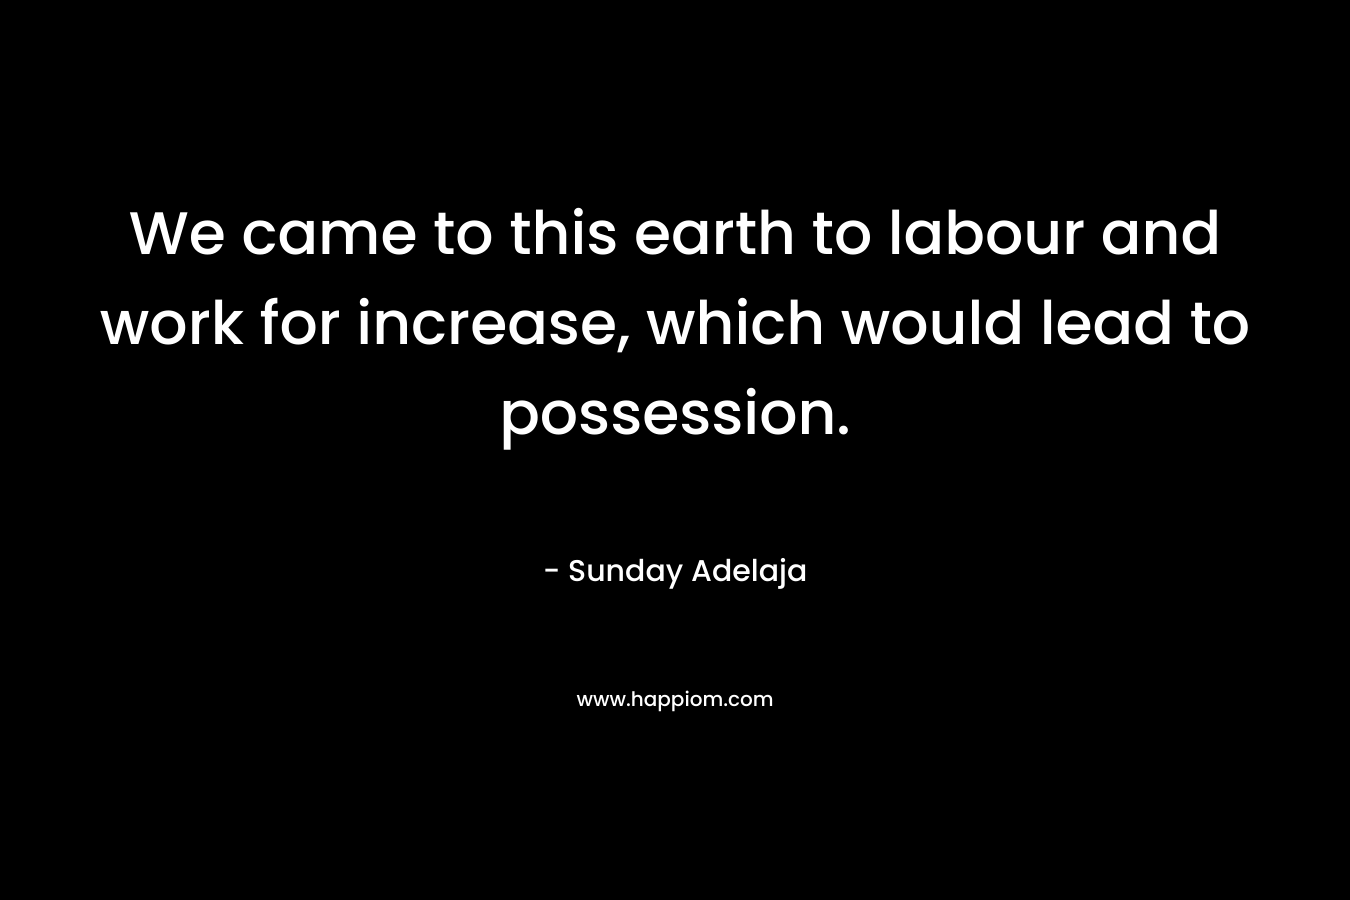 We came to this earth to labour and work for increase, which would lead to possession. – Sunday Adelaja